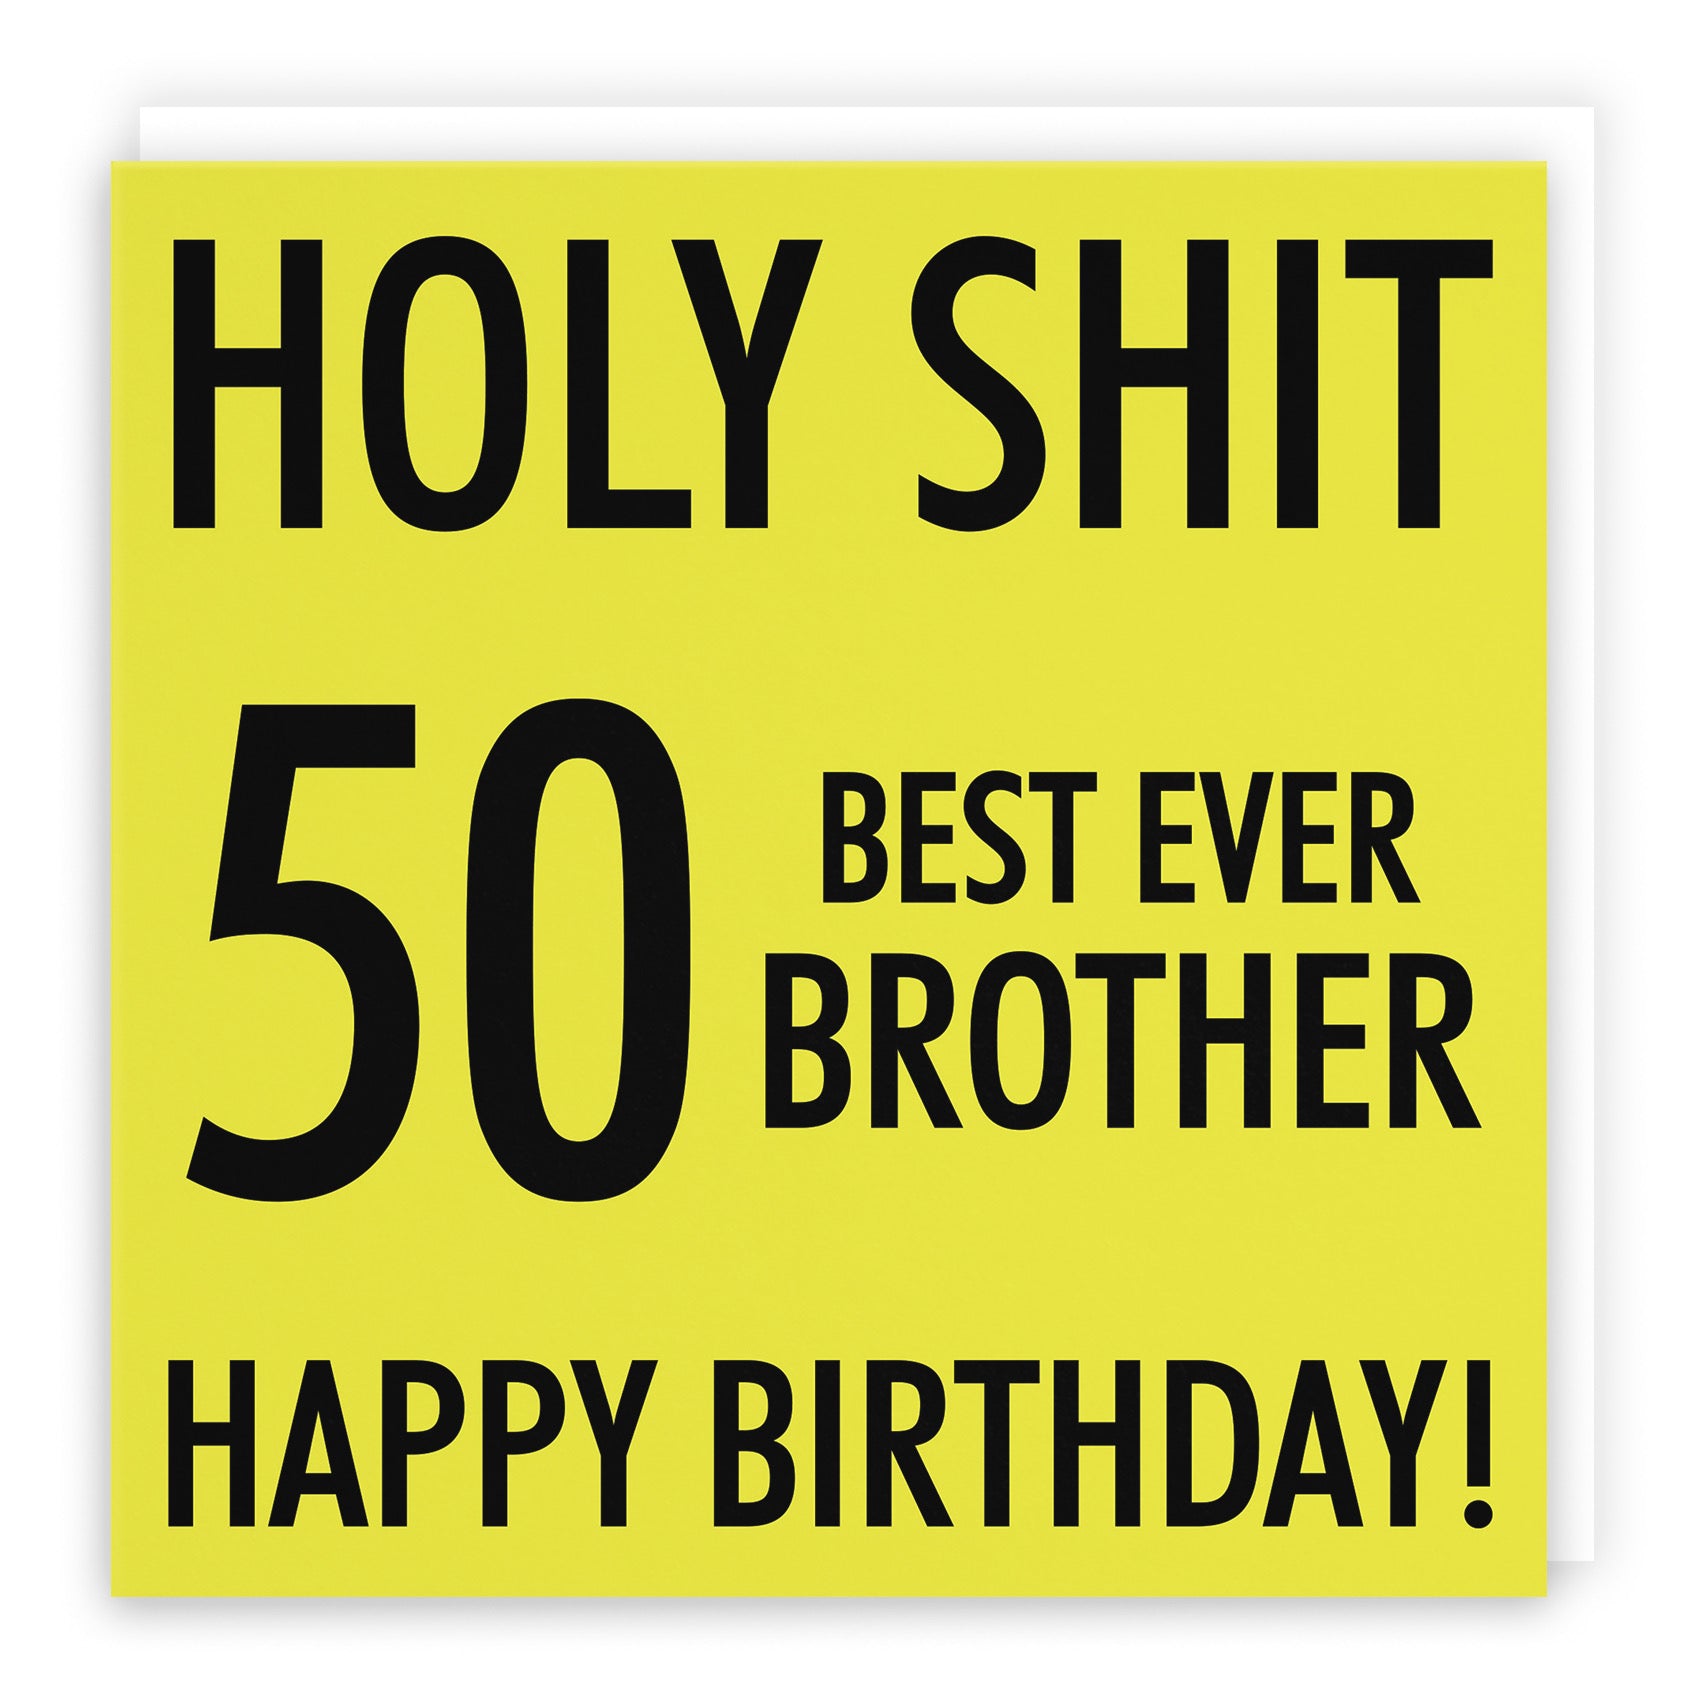 50th Brother Birthday Card Holy Shit - Default Title (B086MZ5P6N)